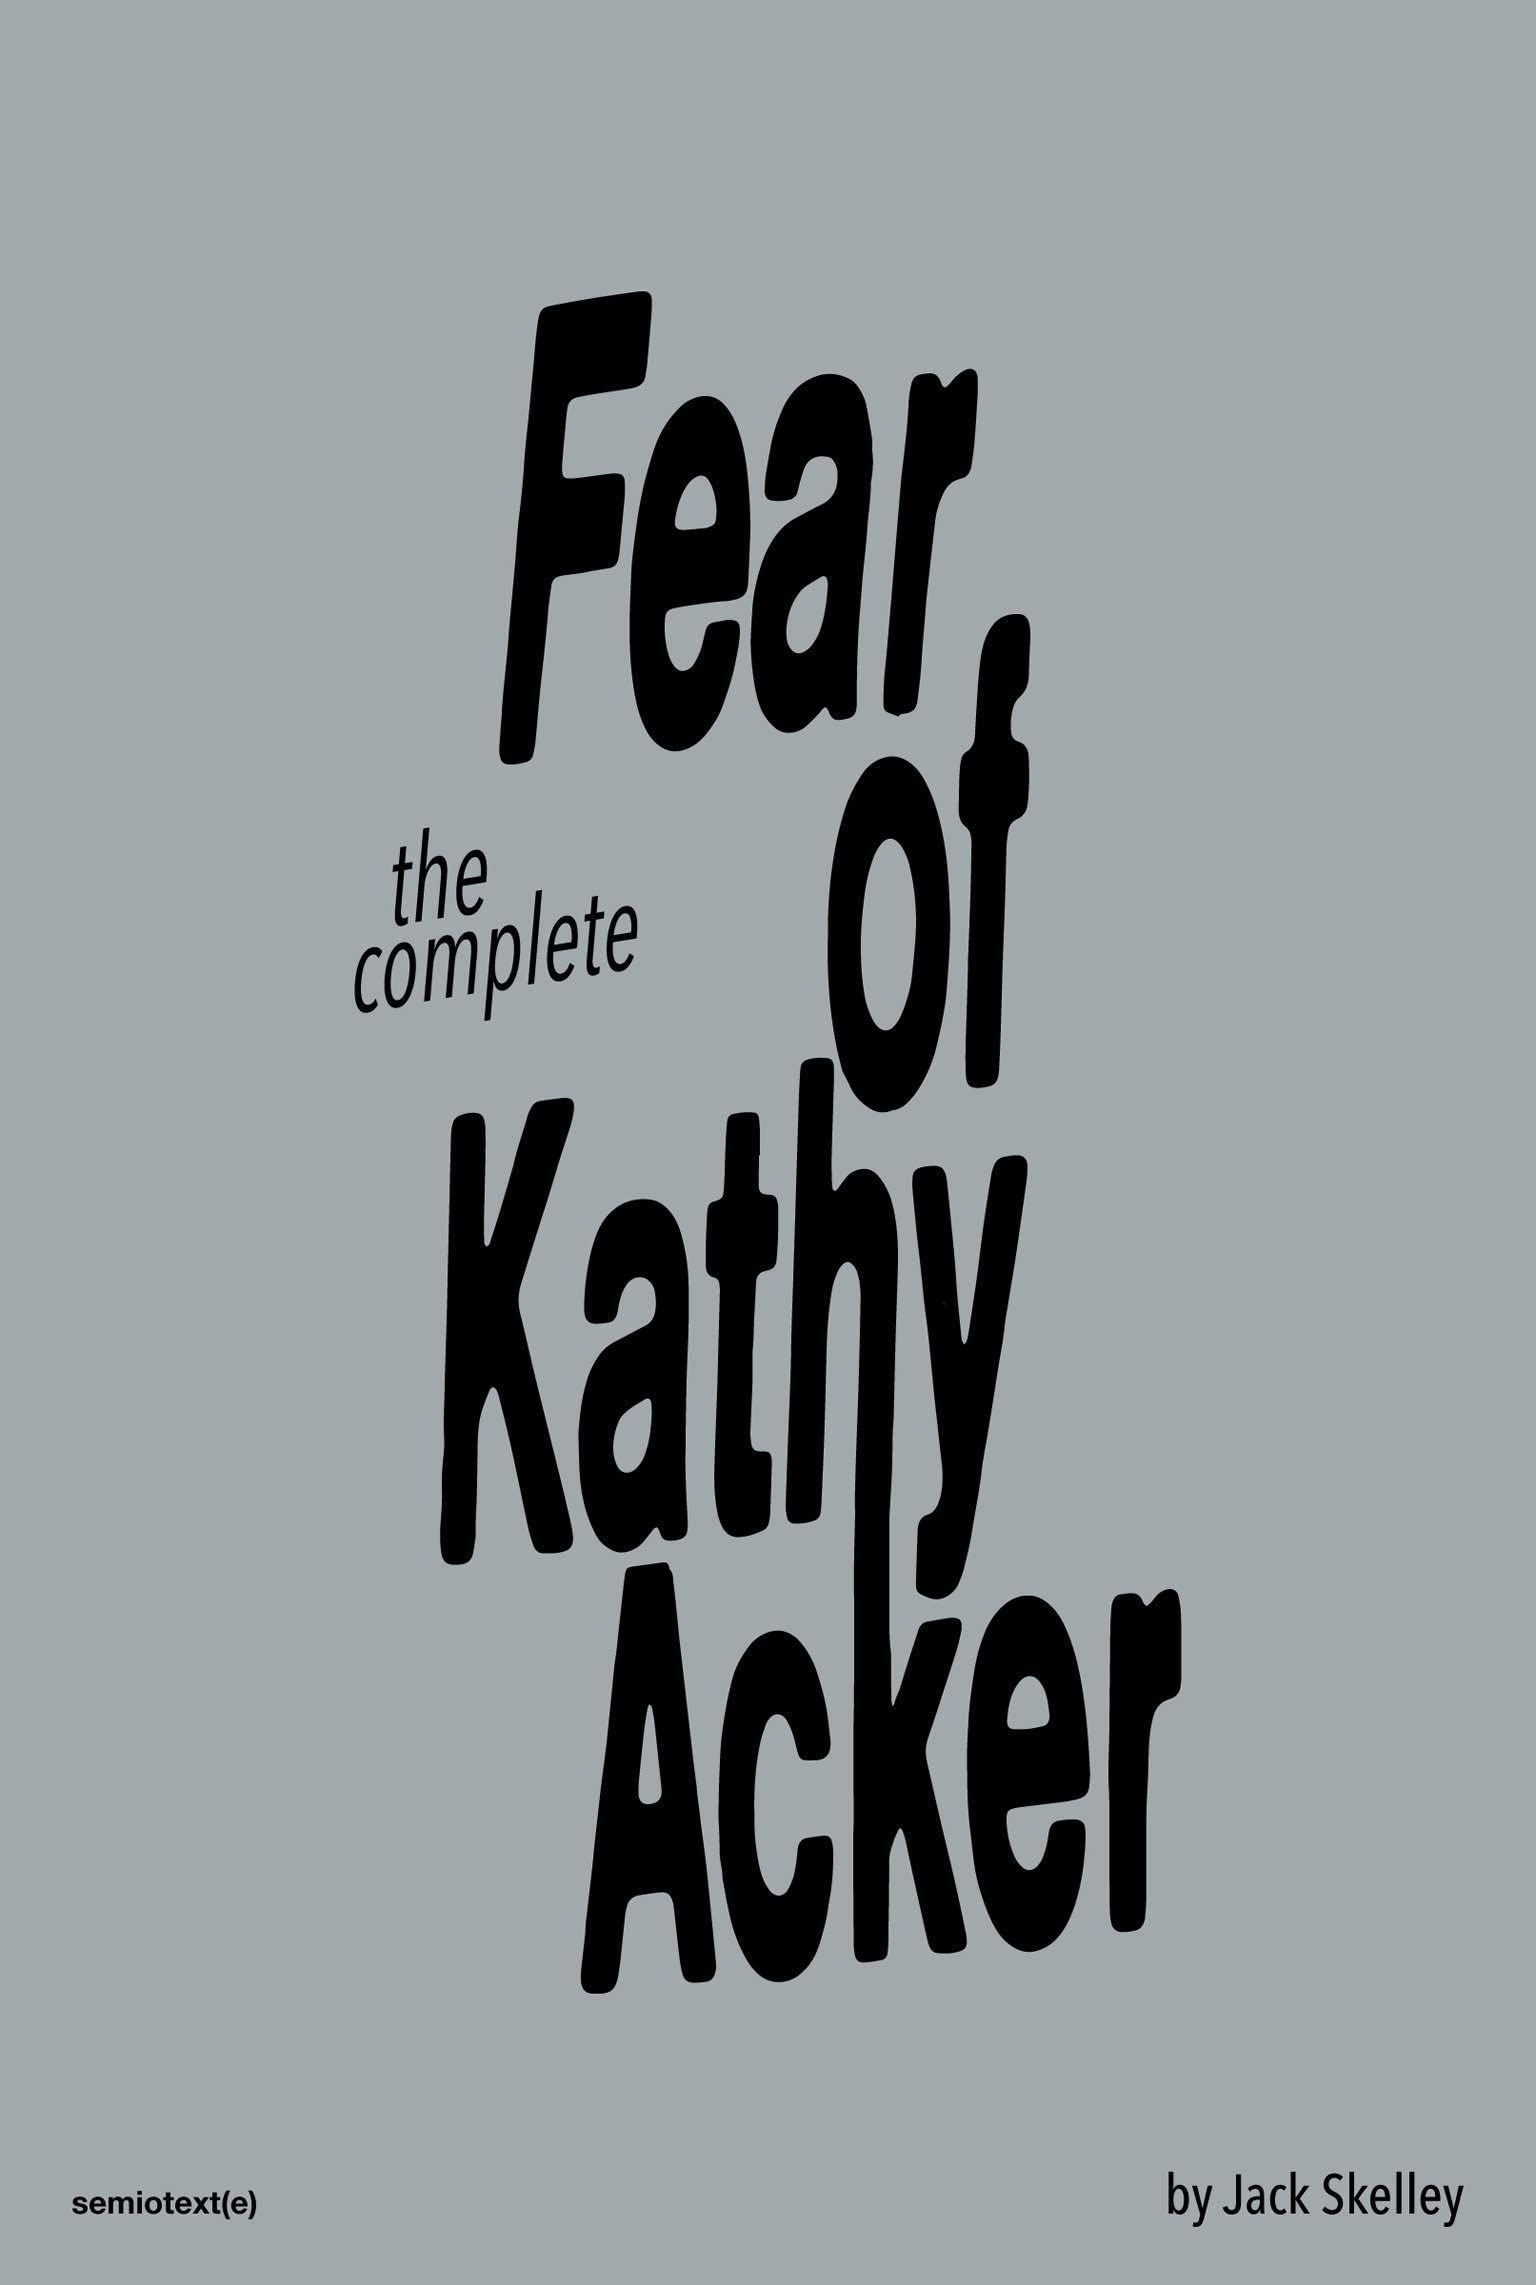 Funny, Scary, Sexy Portals to Expression: On Jack Skelley’s “The Complete Fear of Kathy Acker”